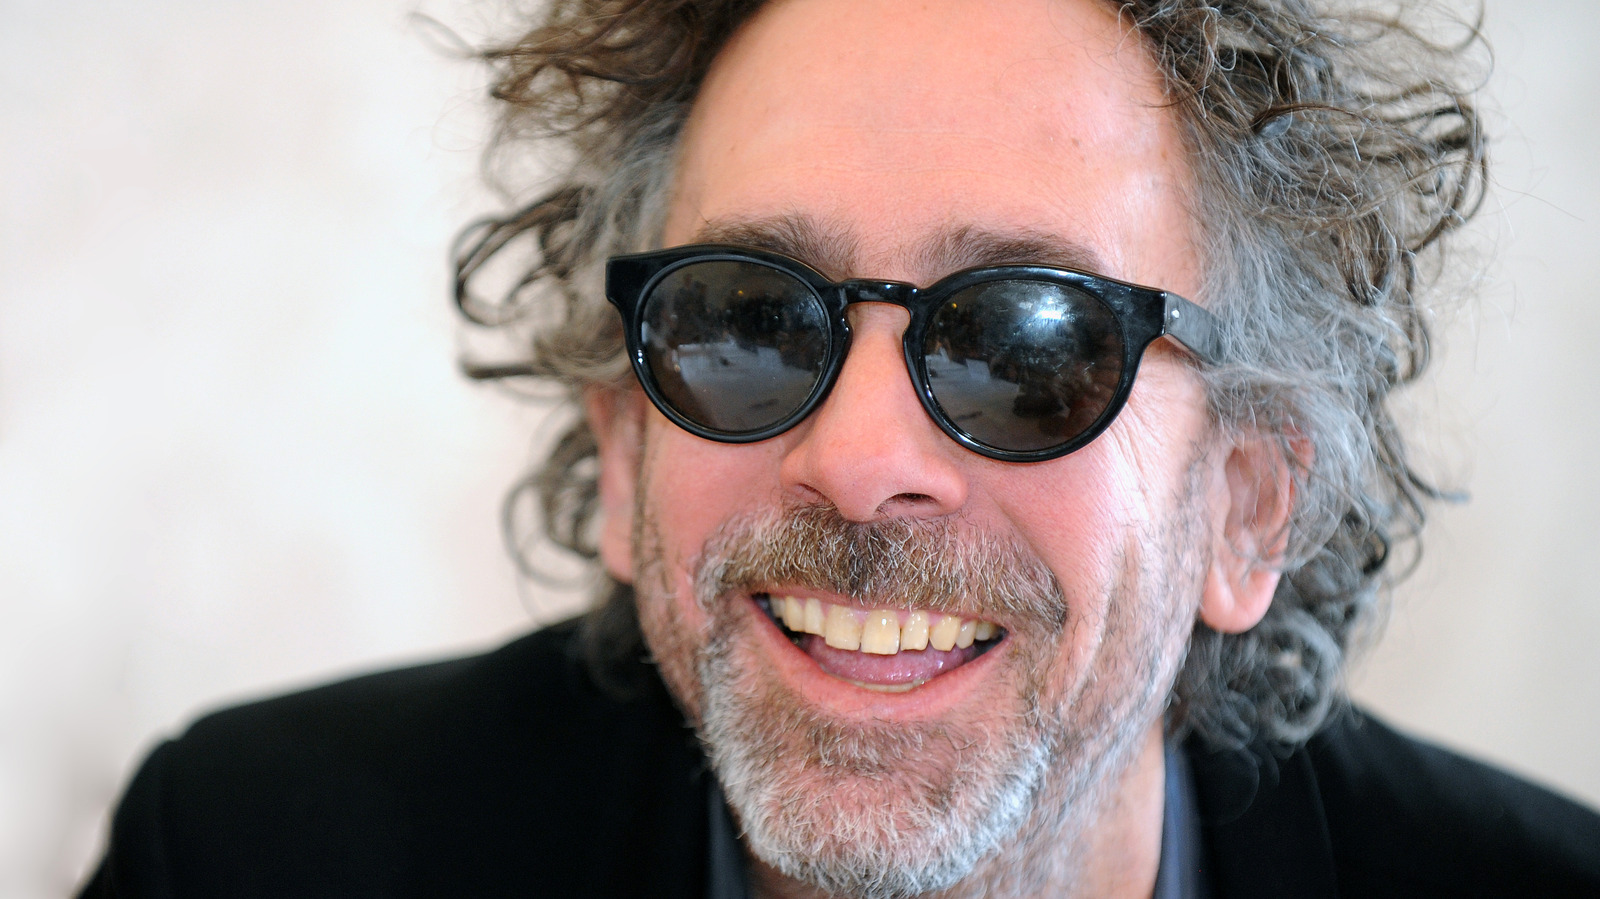 Tim Burton: The master of gothic and whimsical filmmaking